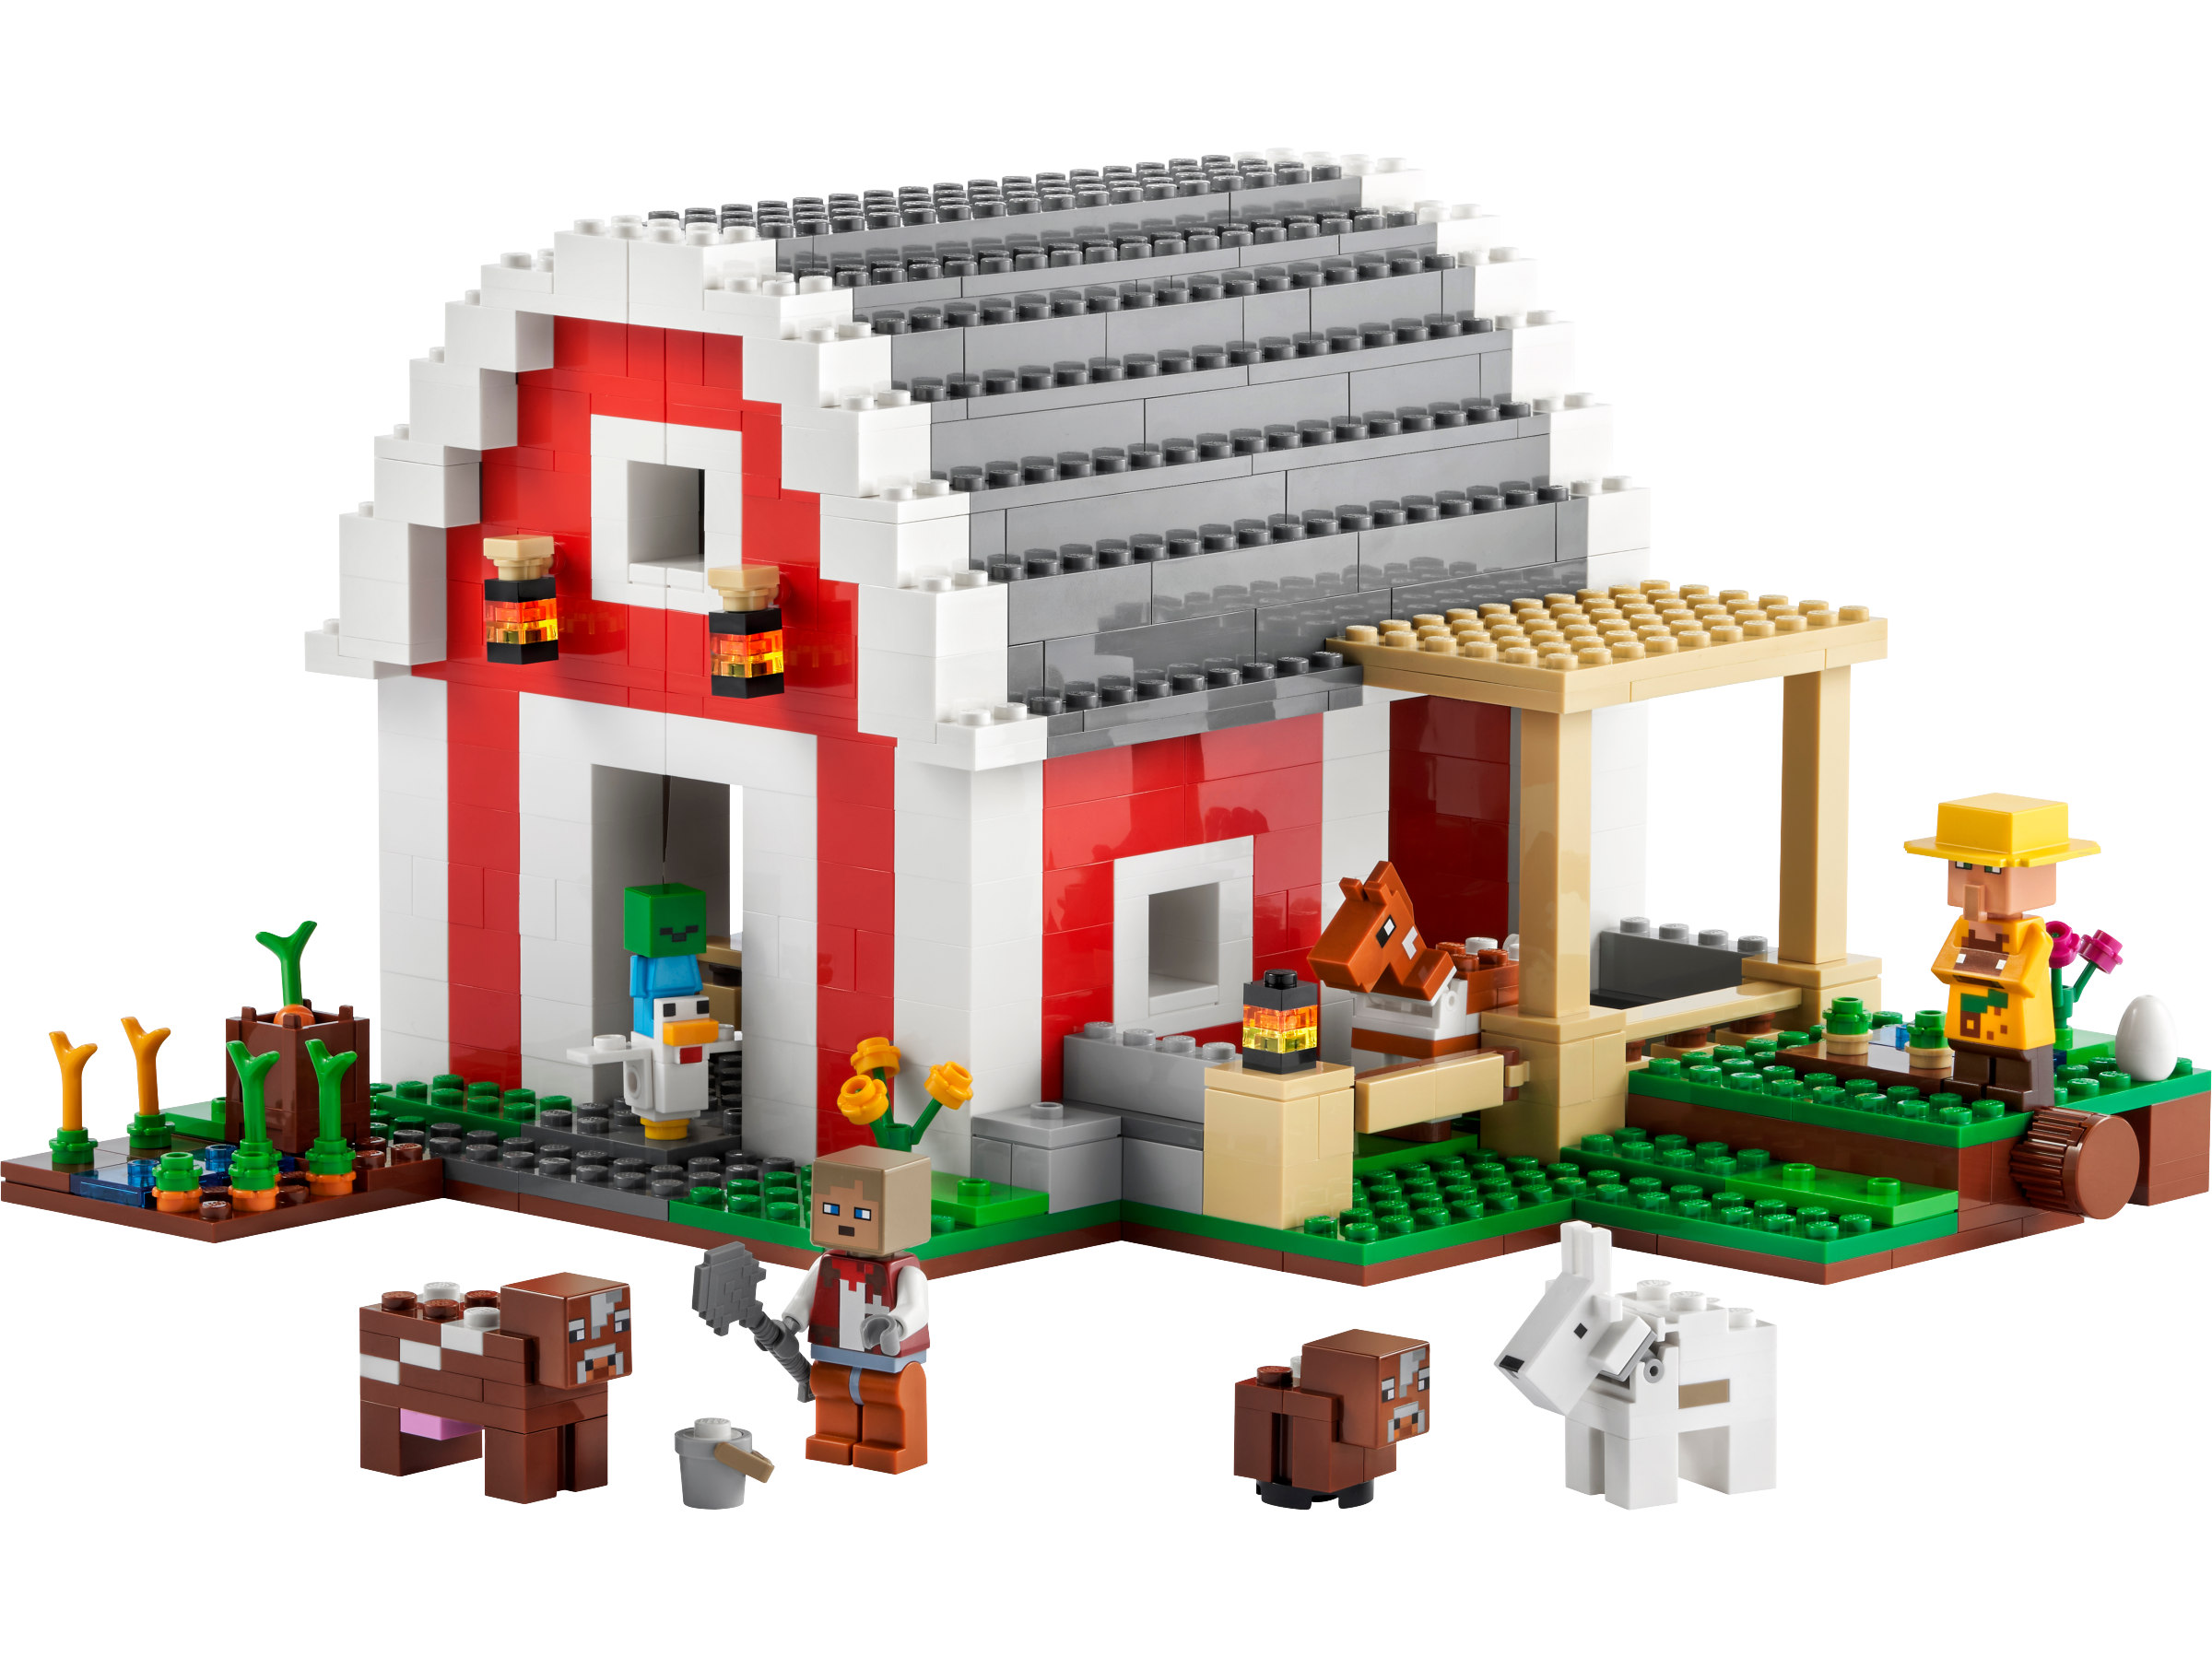 The Red Barn 21187 | Minecraft® | Buy online at the Official LEGO® Shop US